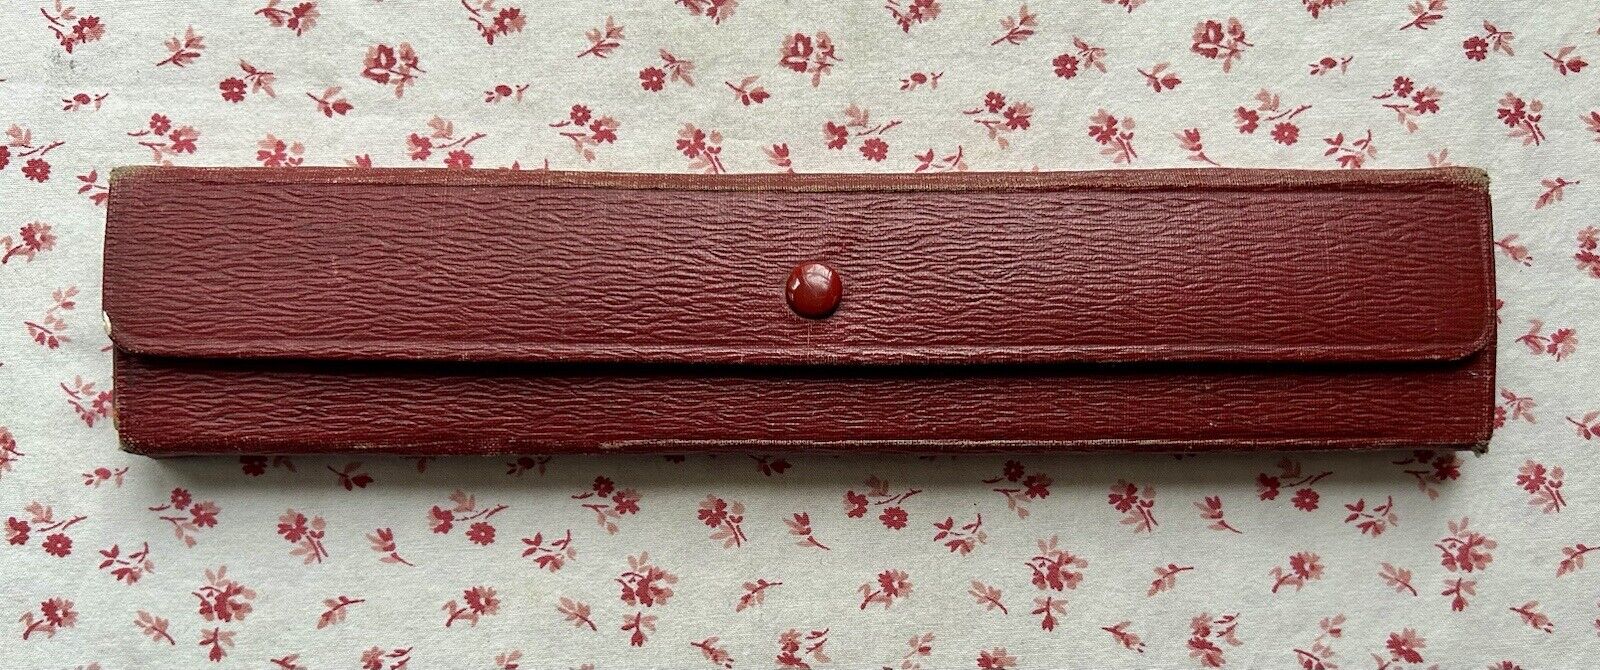 Antique Red Eberhard Faber Pencil Case ~ New York